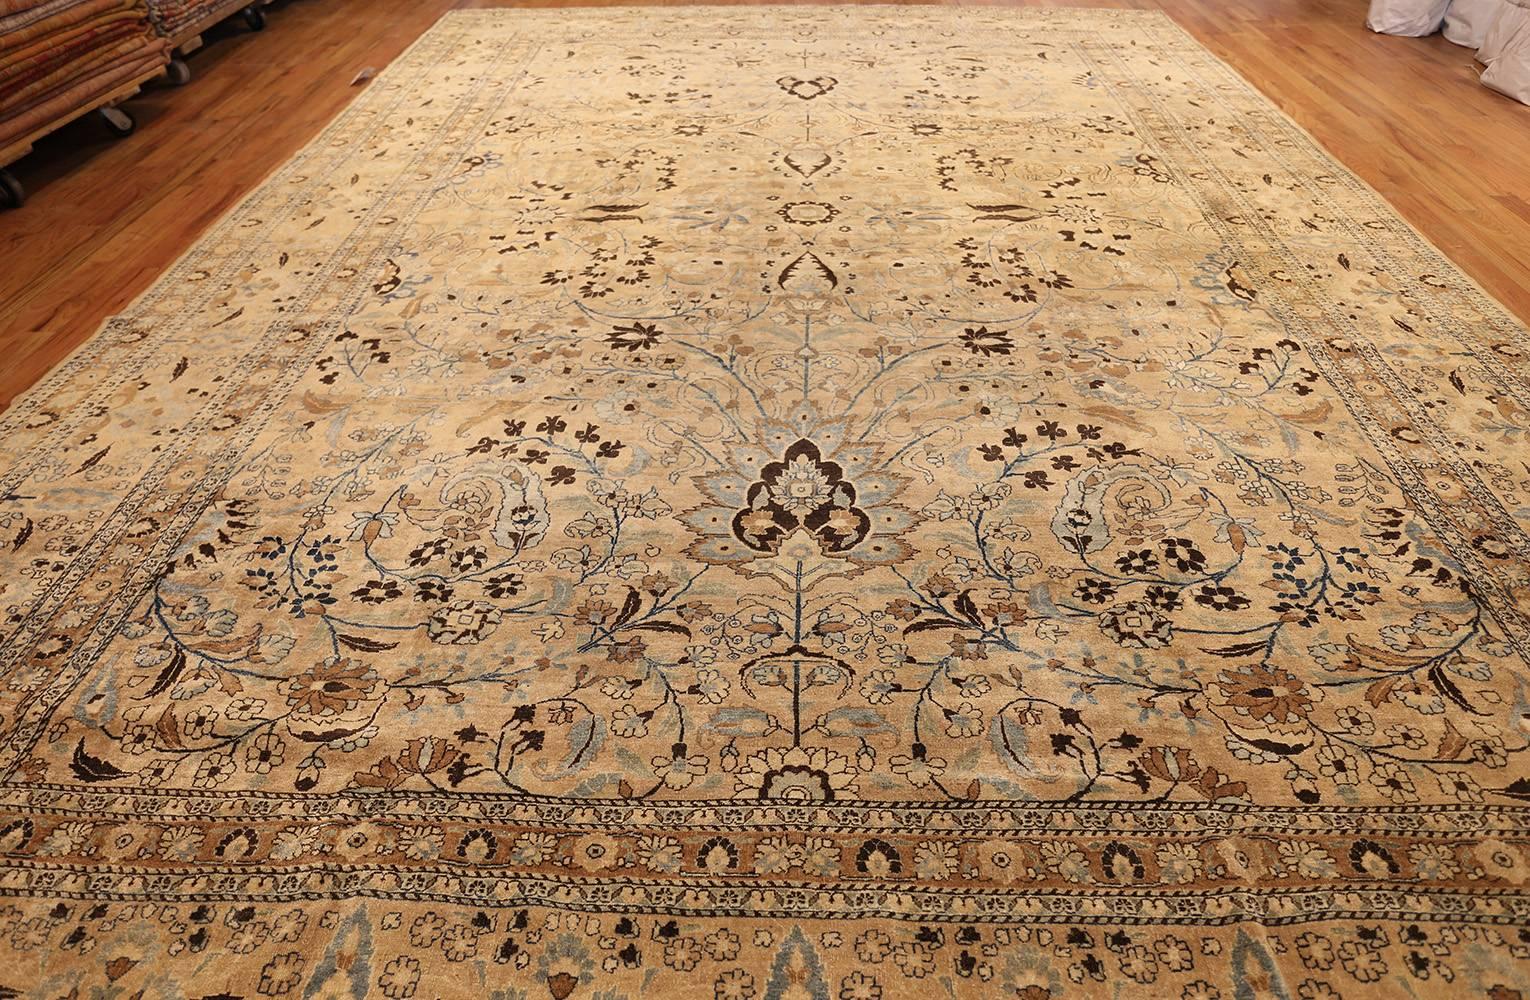 Extremely Decorative and Beautiful Large Scale Antique Persian Khorassan Rug, Country Of Origin: Persia, Circa Date: 1910. Size: 11 ft 8 in x 17 ft 9 in (3.56 m x 5.41 m)

This gorgeous, neutral Khorassan carpet was created around 1910 and is an